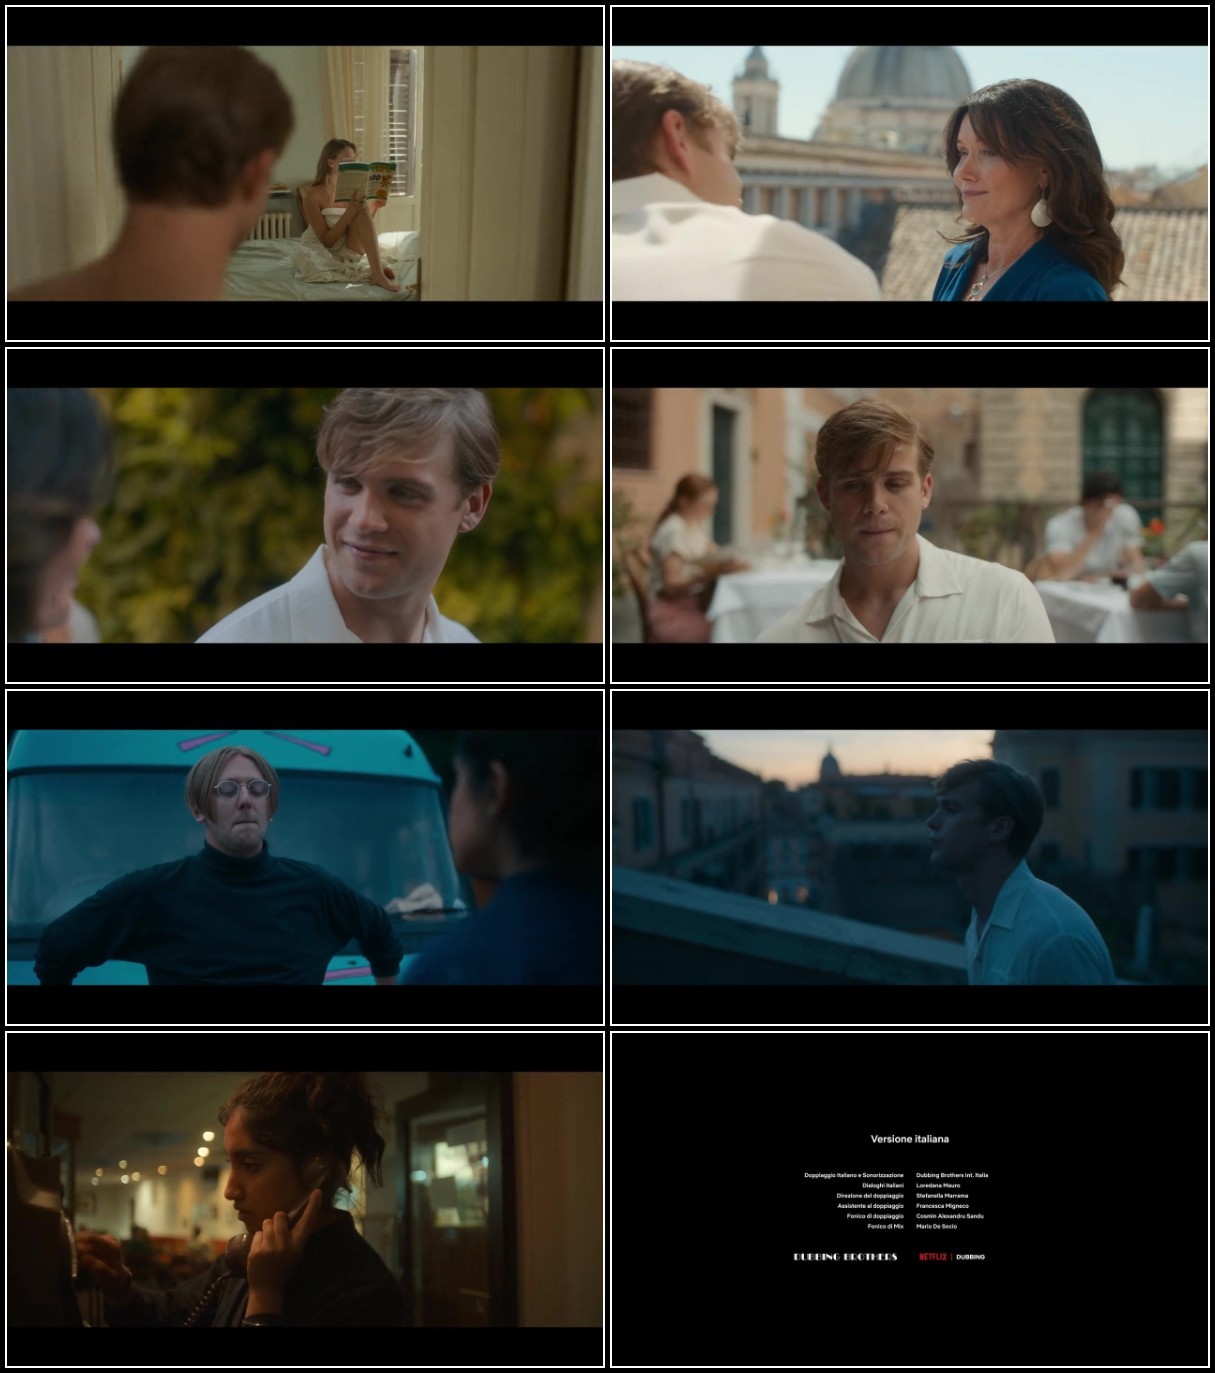 One Day S01 COMPLETE NORDiC 720p WEBRip x264-STATiXDK MdjvBBHr_o